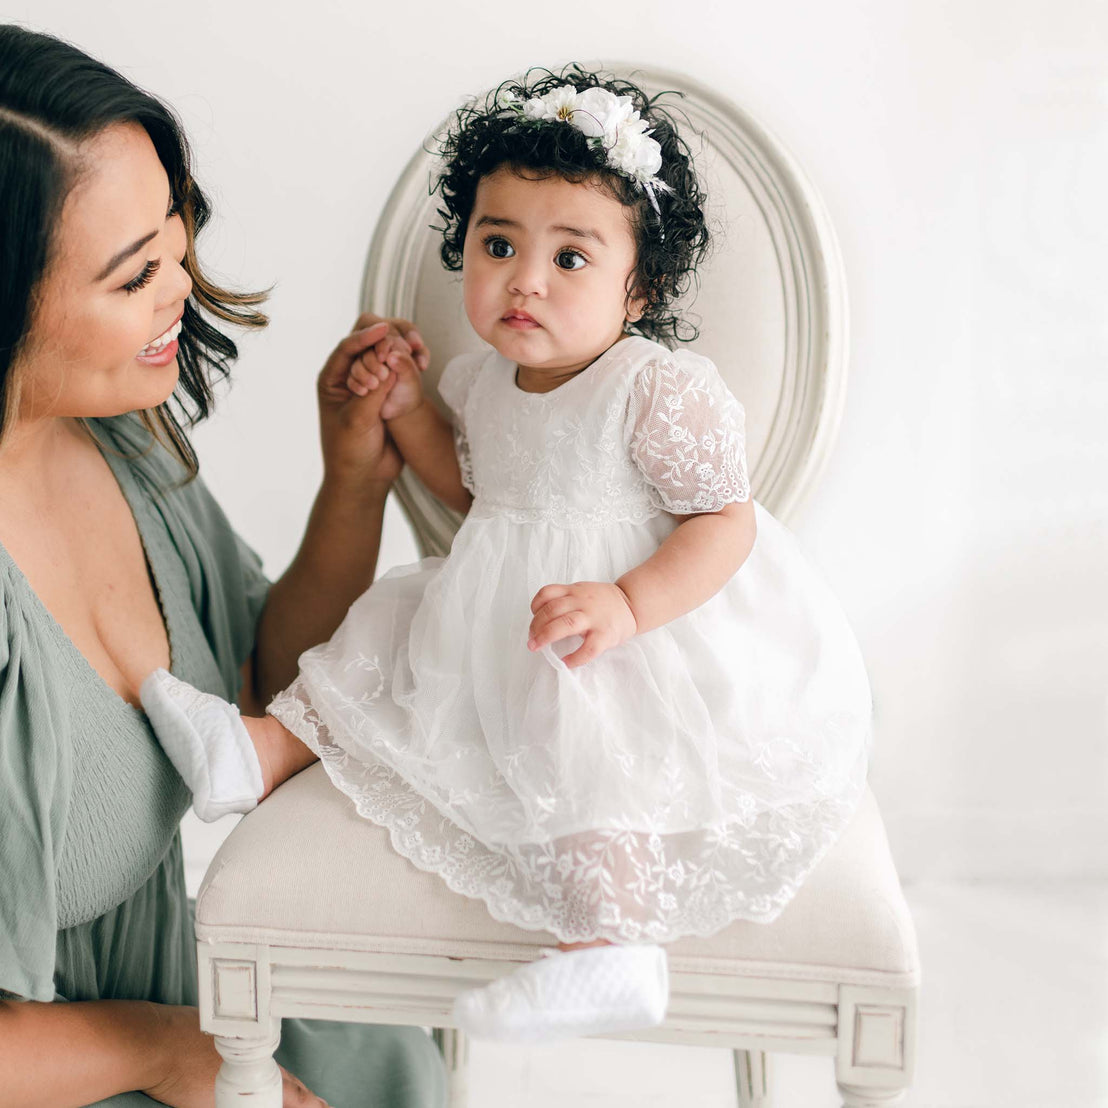 A woman in a gray dress holds the hand of a baby sitting on a chair in an adorable Ella Romper Dress, made of light ivory cotton gauze. The baby, with curly hair adorned with a floral headband, looks delightful against the light-colored indoor background.